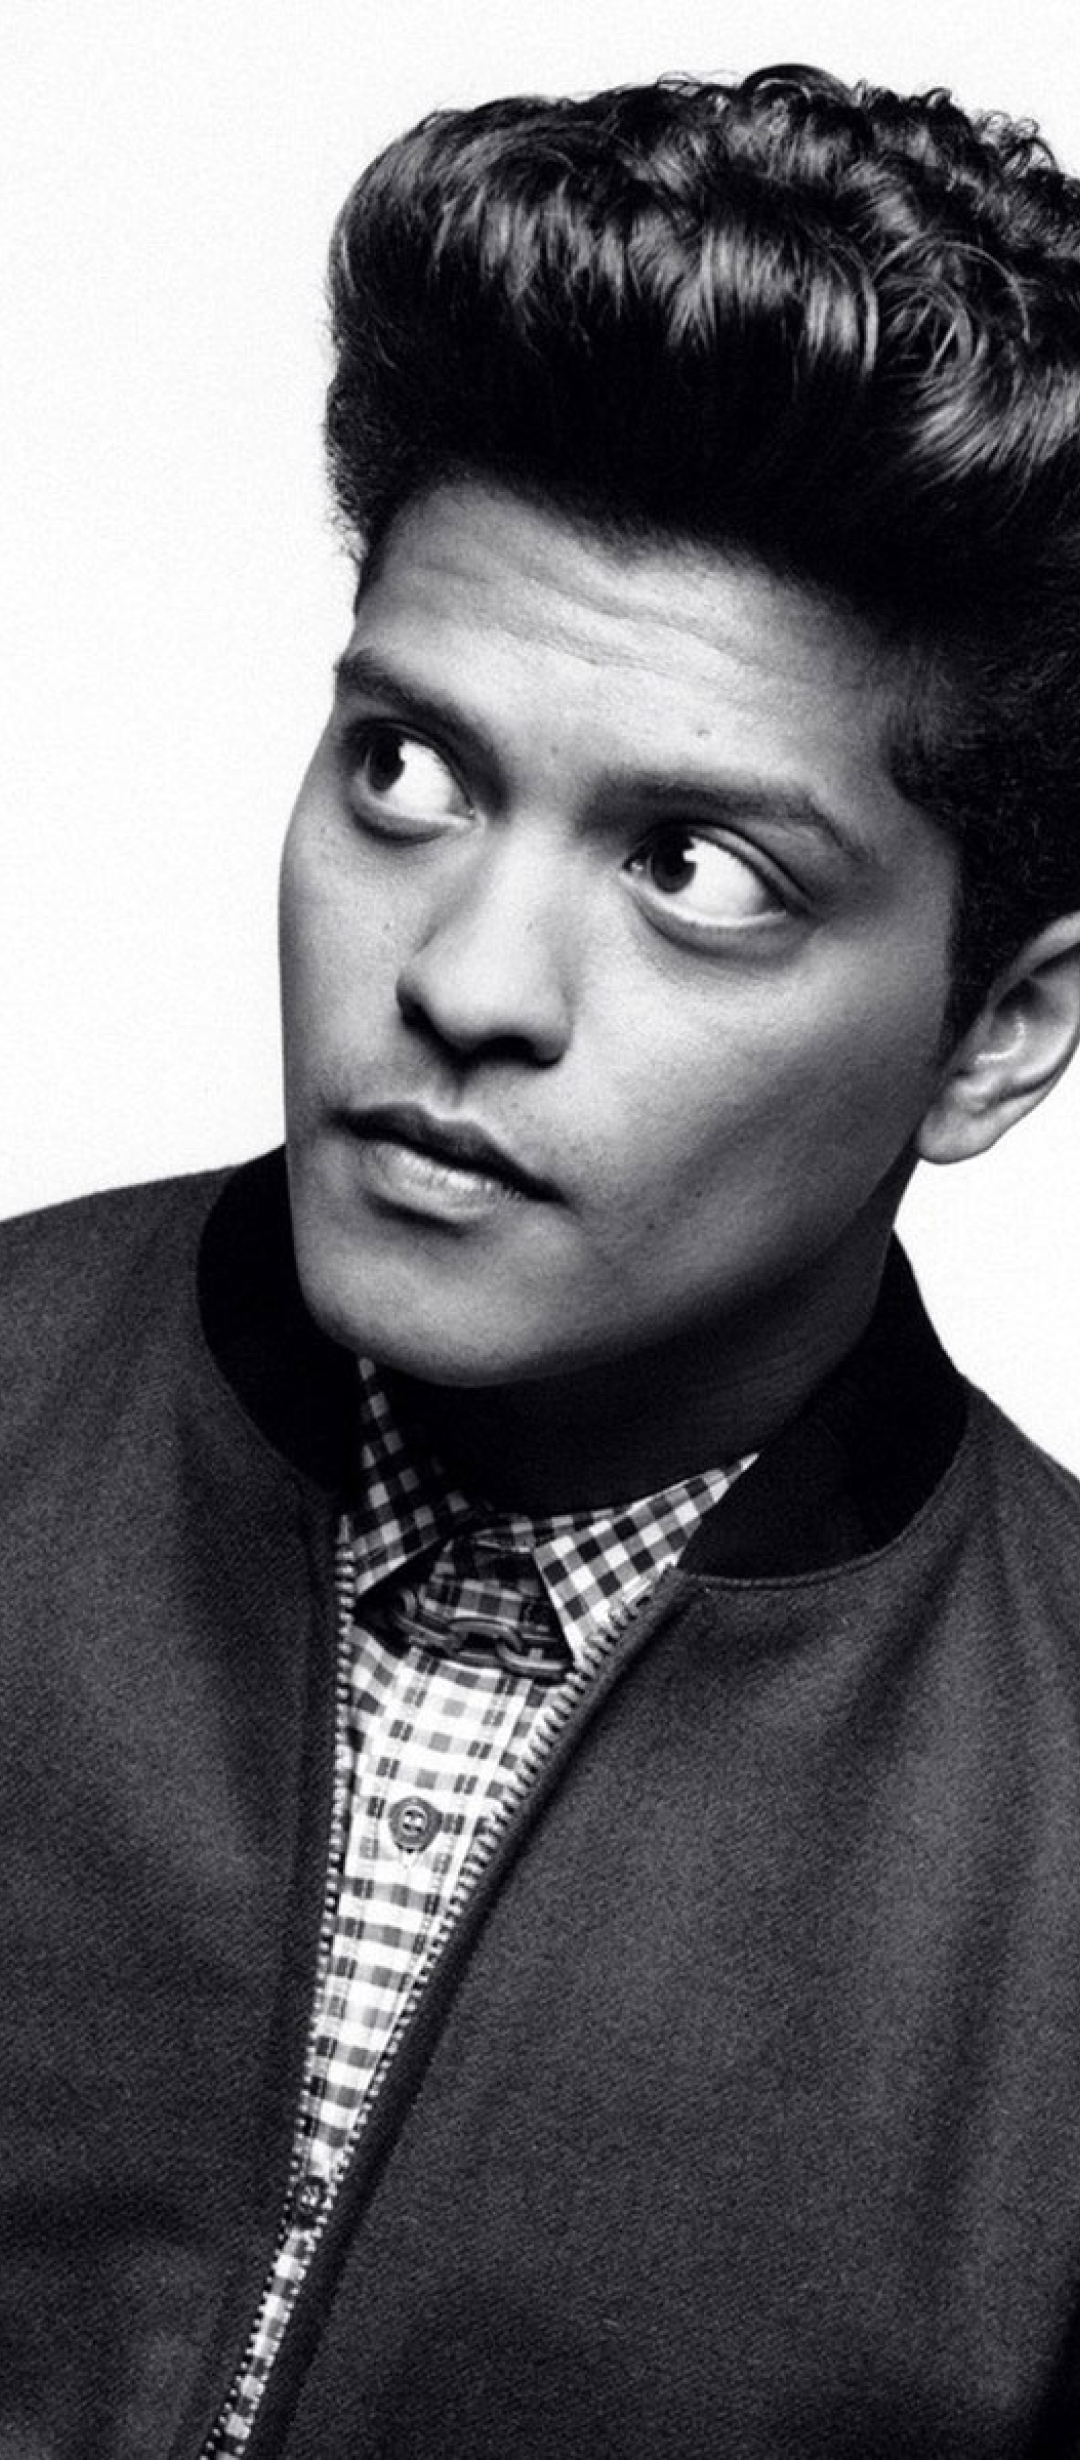 1080x2460 Bruno Mars Actor Performance 1080x2460 Resolution Wallpaper Hd Man 4k Wallpapers Images Photos And Background Wallpapers Den